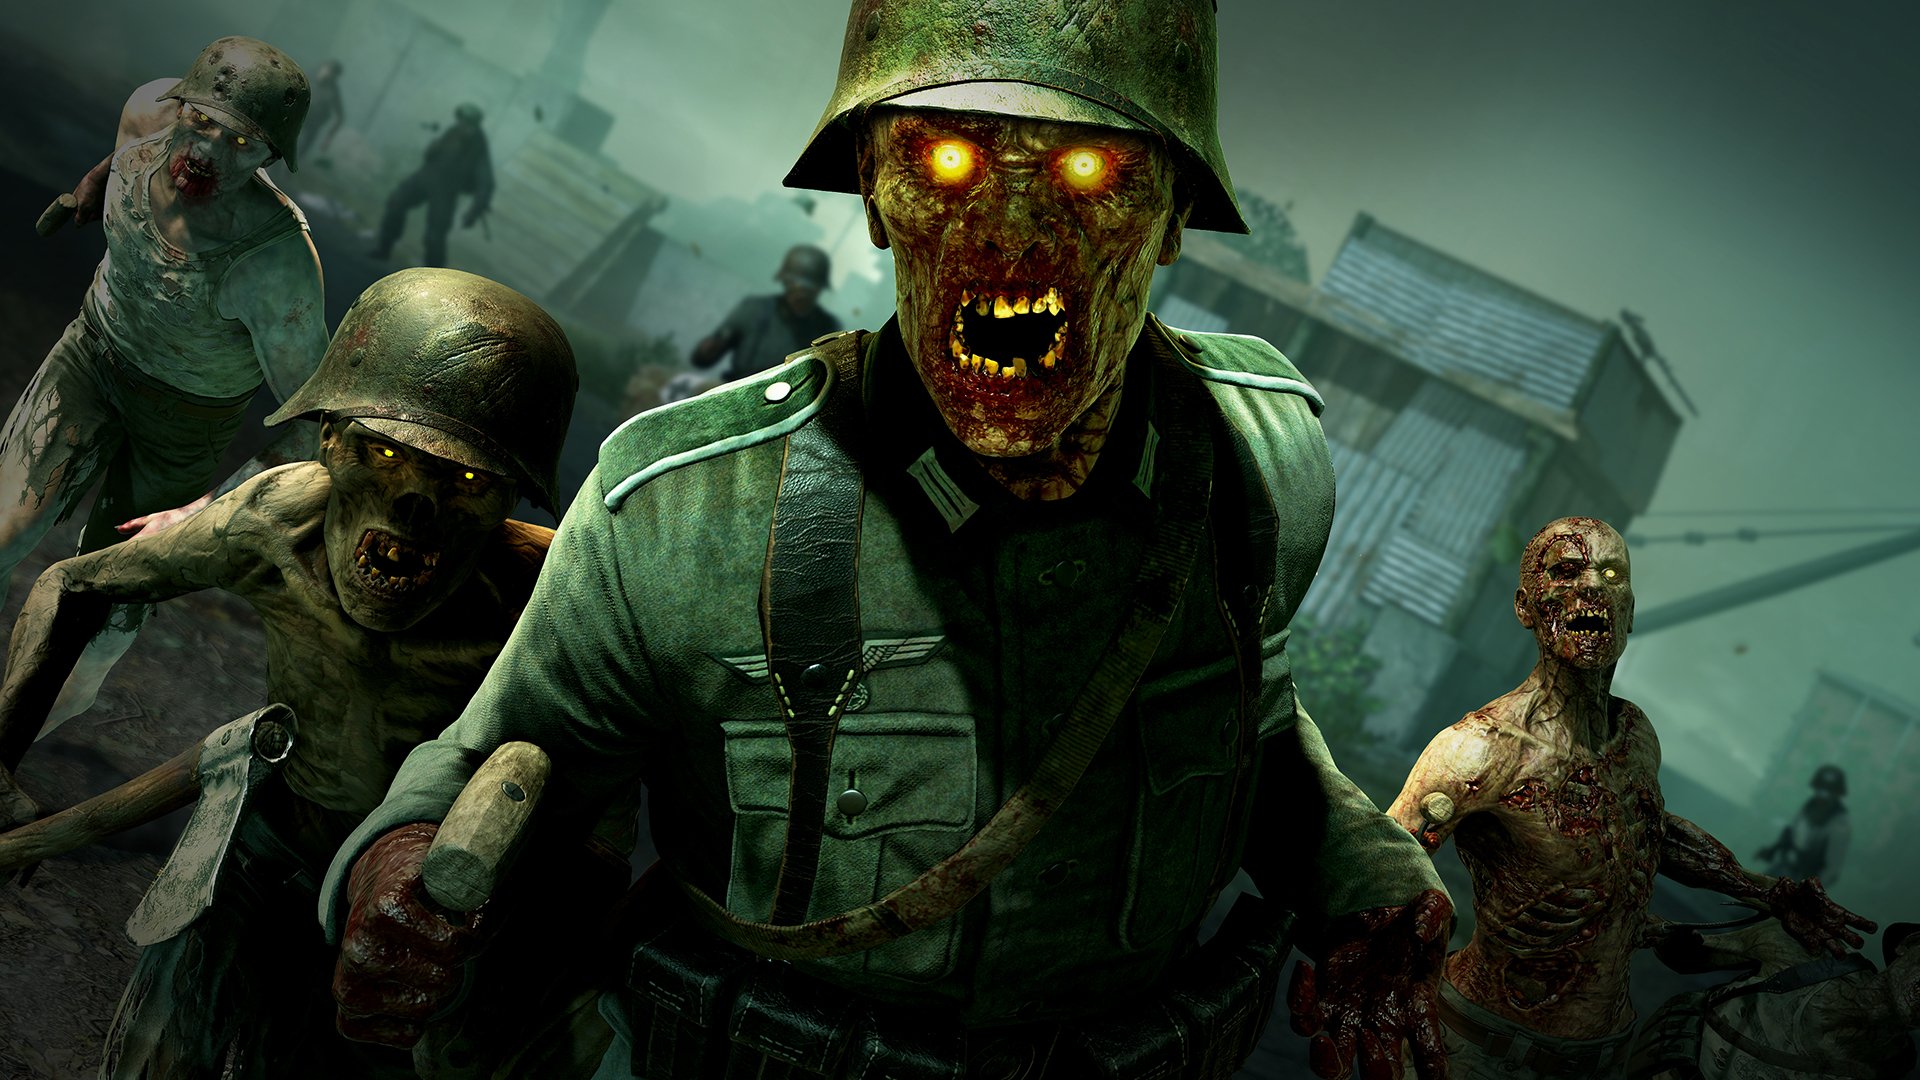 Zombie Army 4: Dead War gameplay shows four players stomping zombie